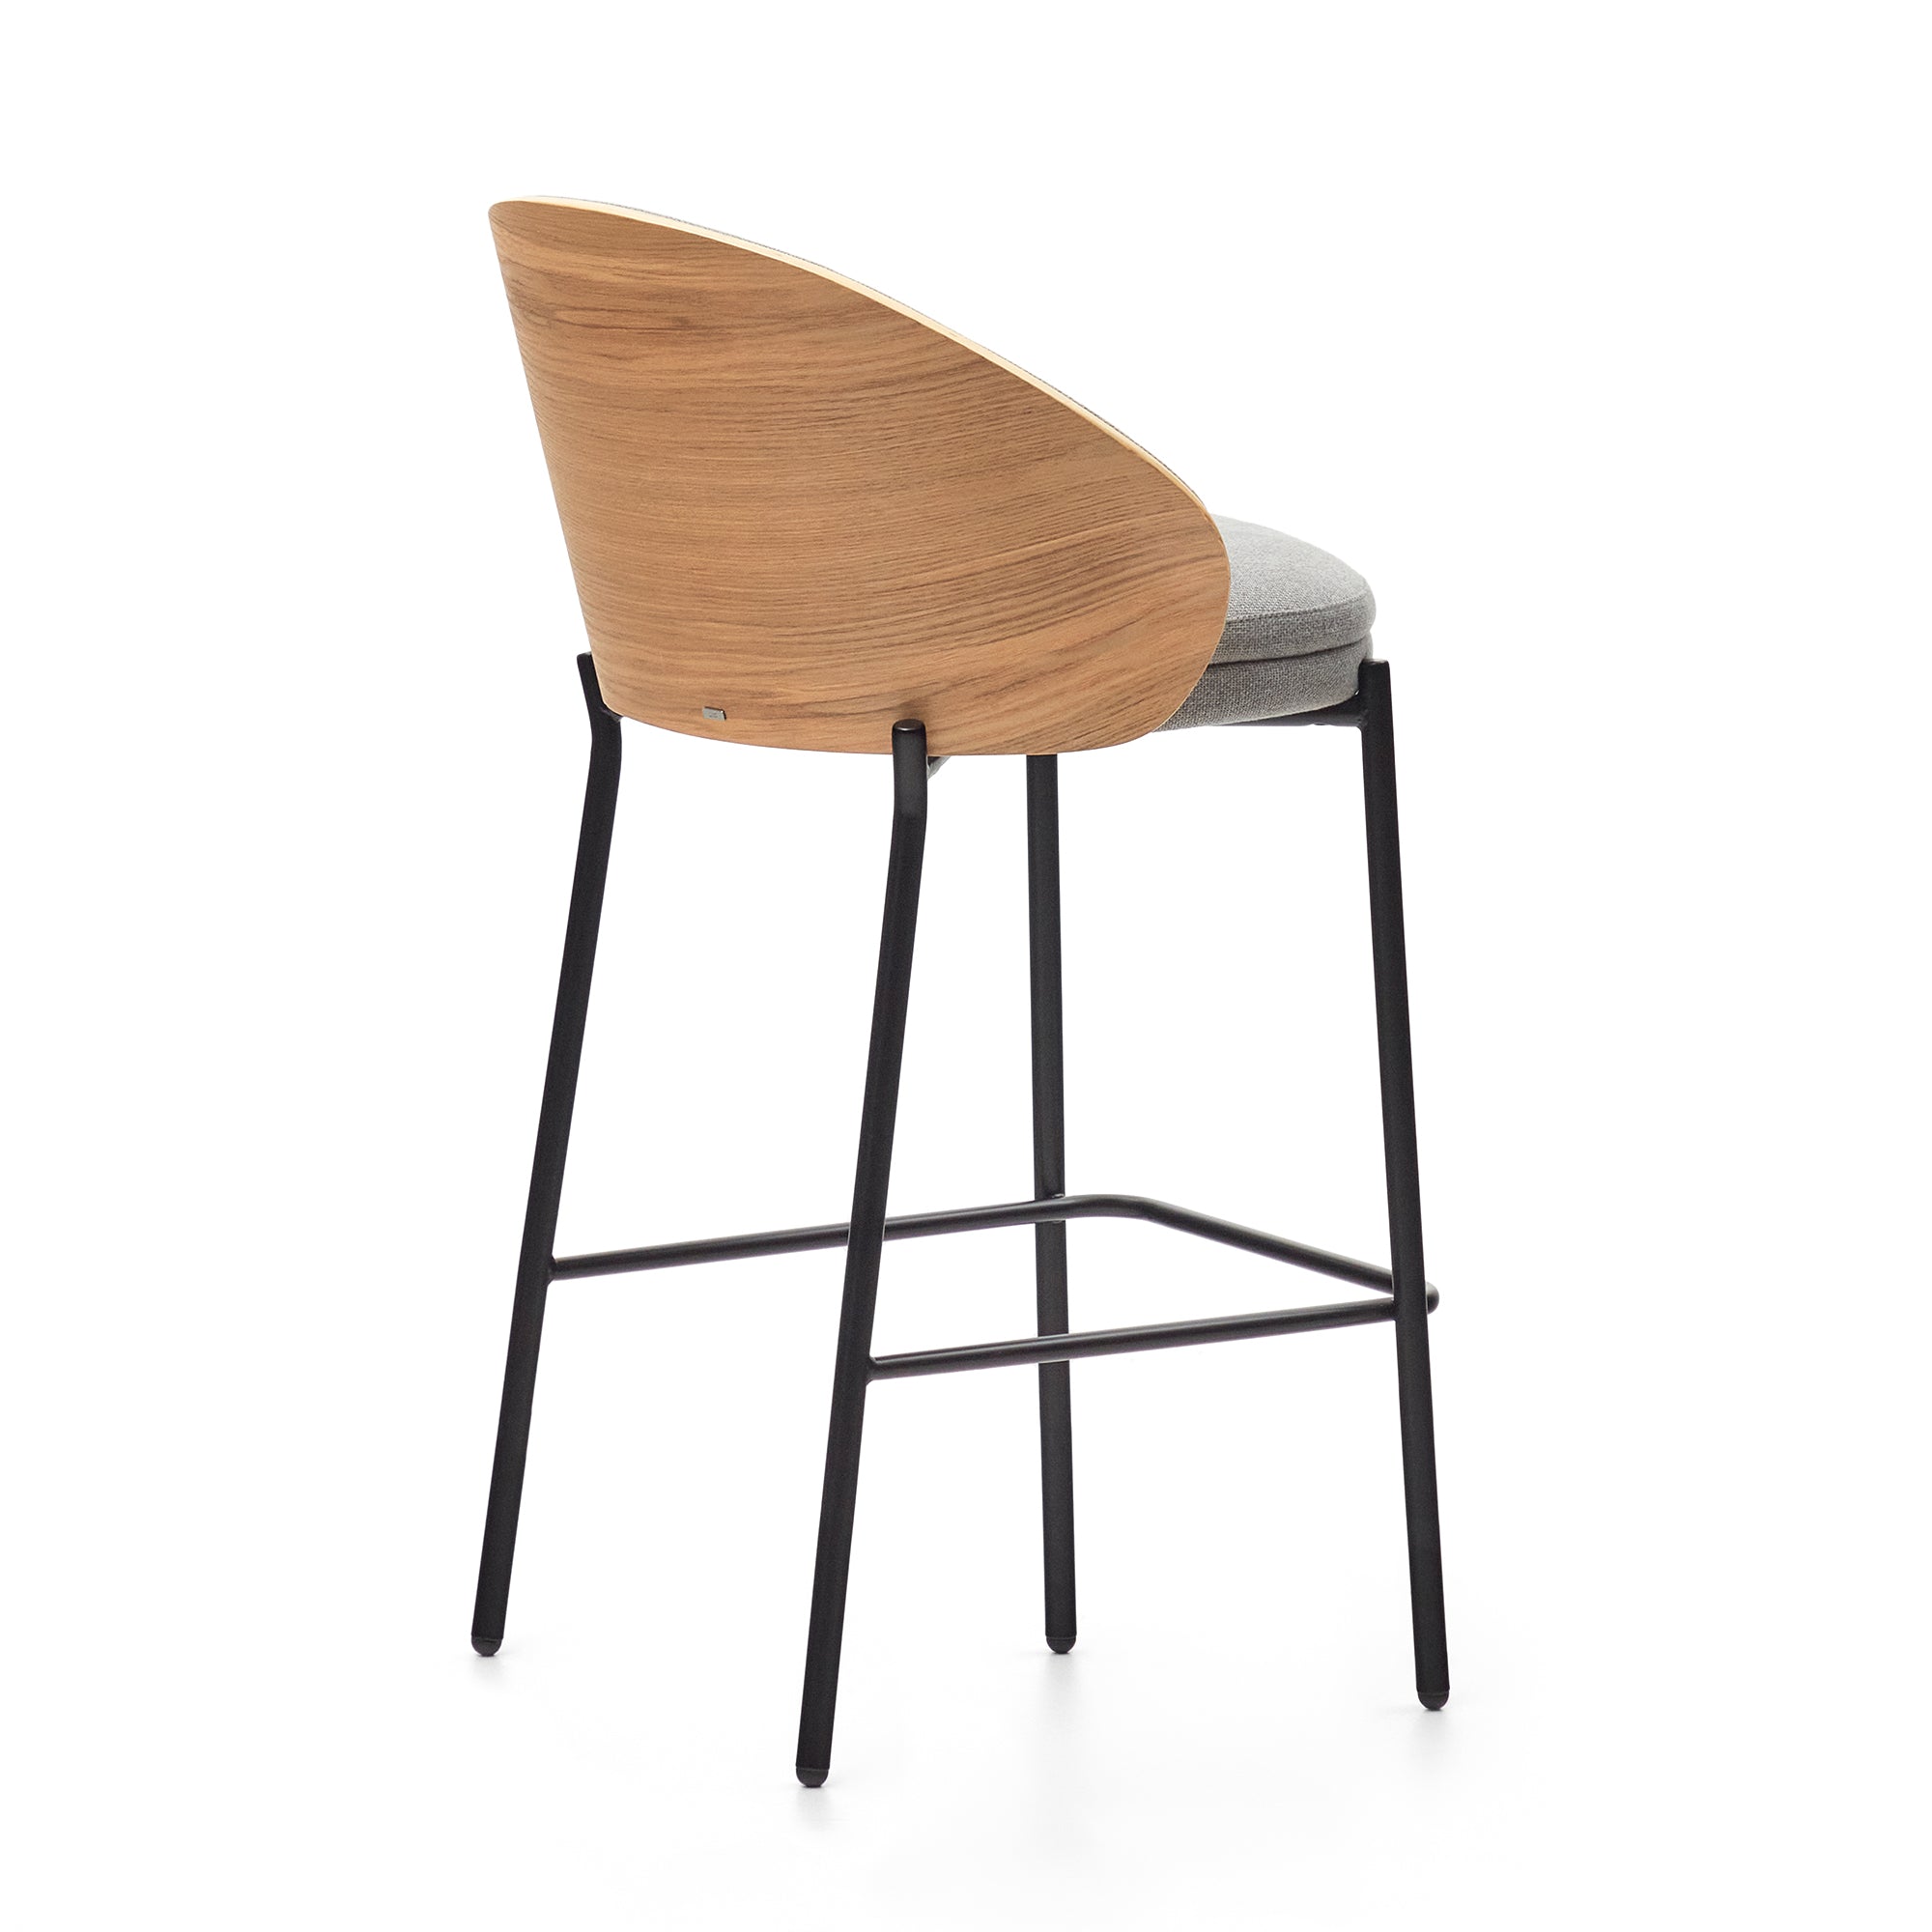 Eamy light grey stool in an ash wood veneer with a natural finish and black metal, 65 cm